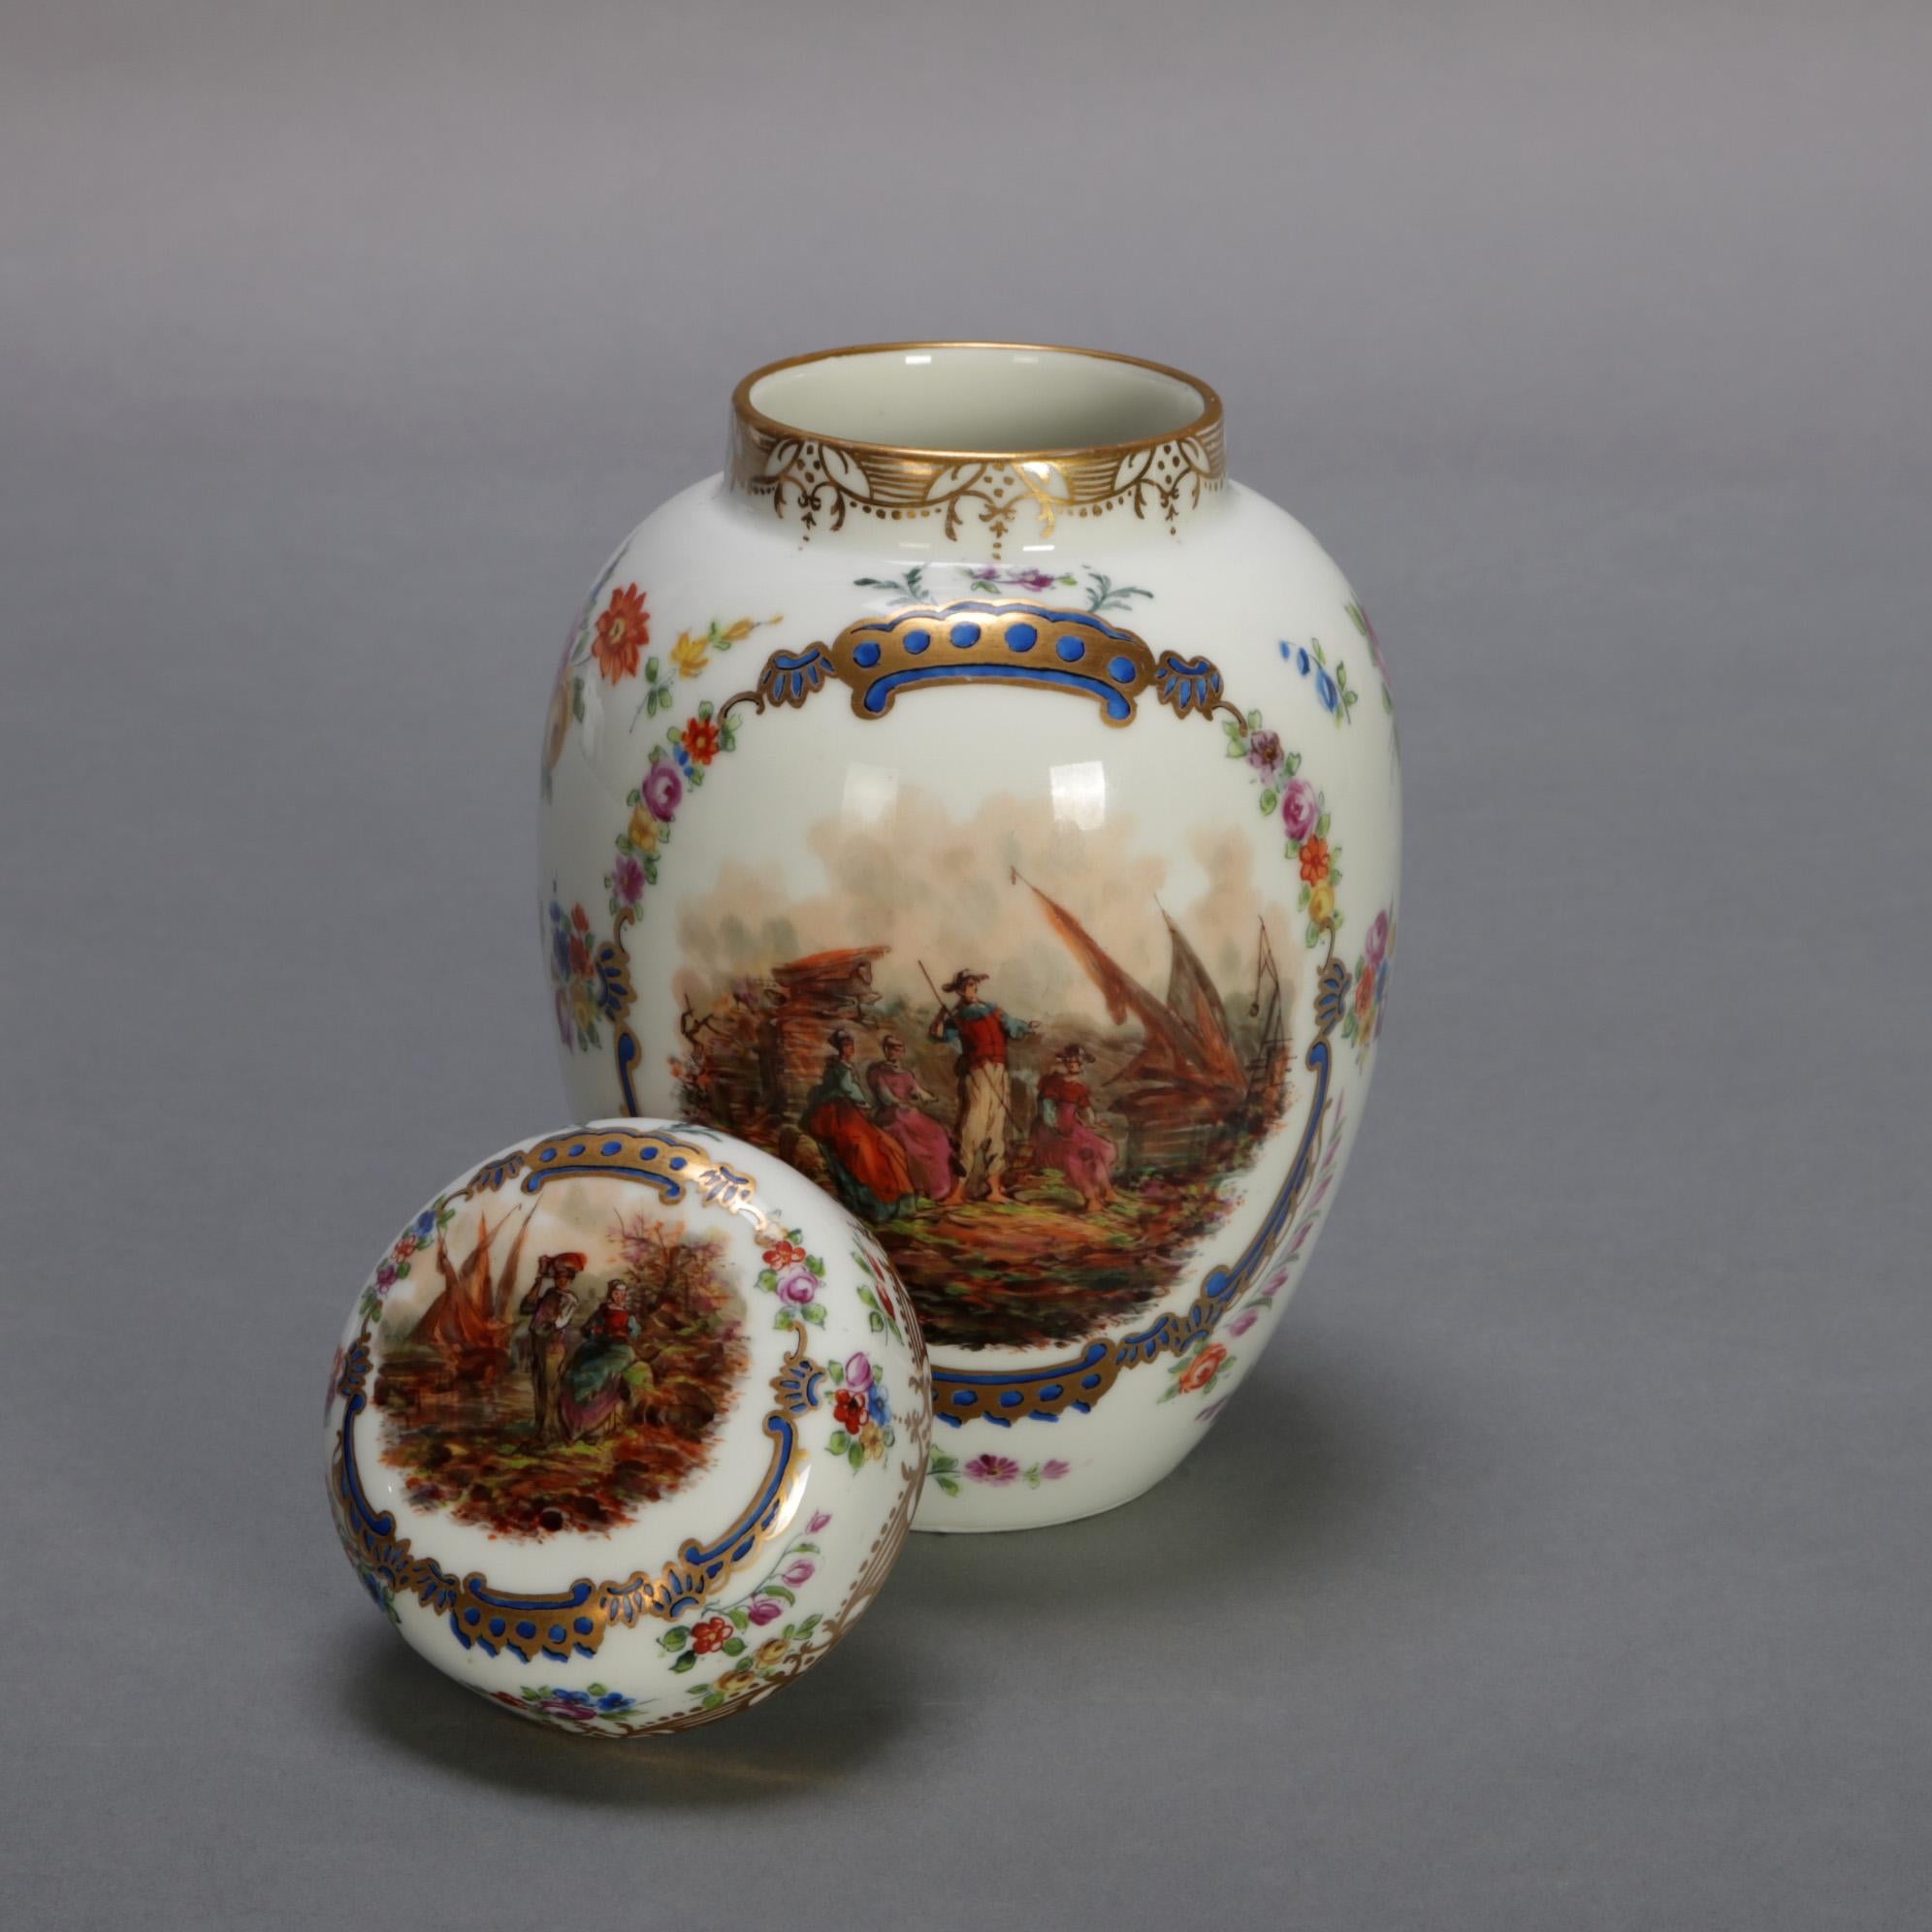 An antique German porcelain lidded tea caddy by Bro. Schone all Hottenstein features urn form with hand painted pictorial reserves of figures in countryside setting with all-over floral decoration and gilt highlights, maker's mark on base as